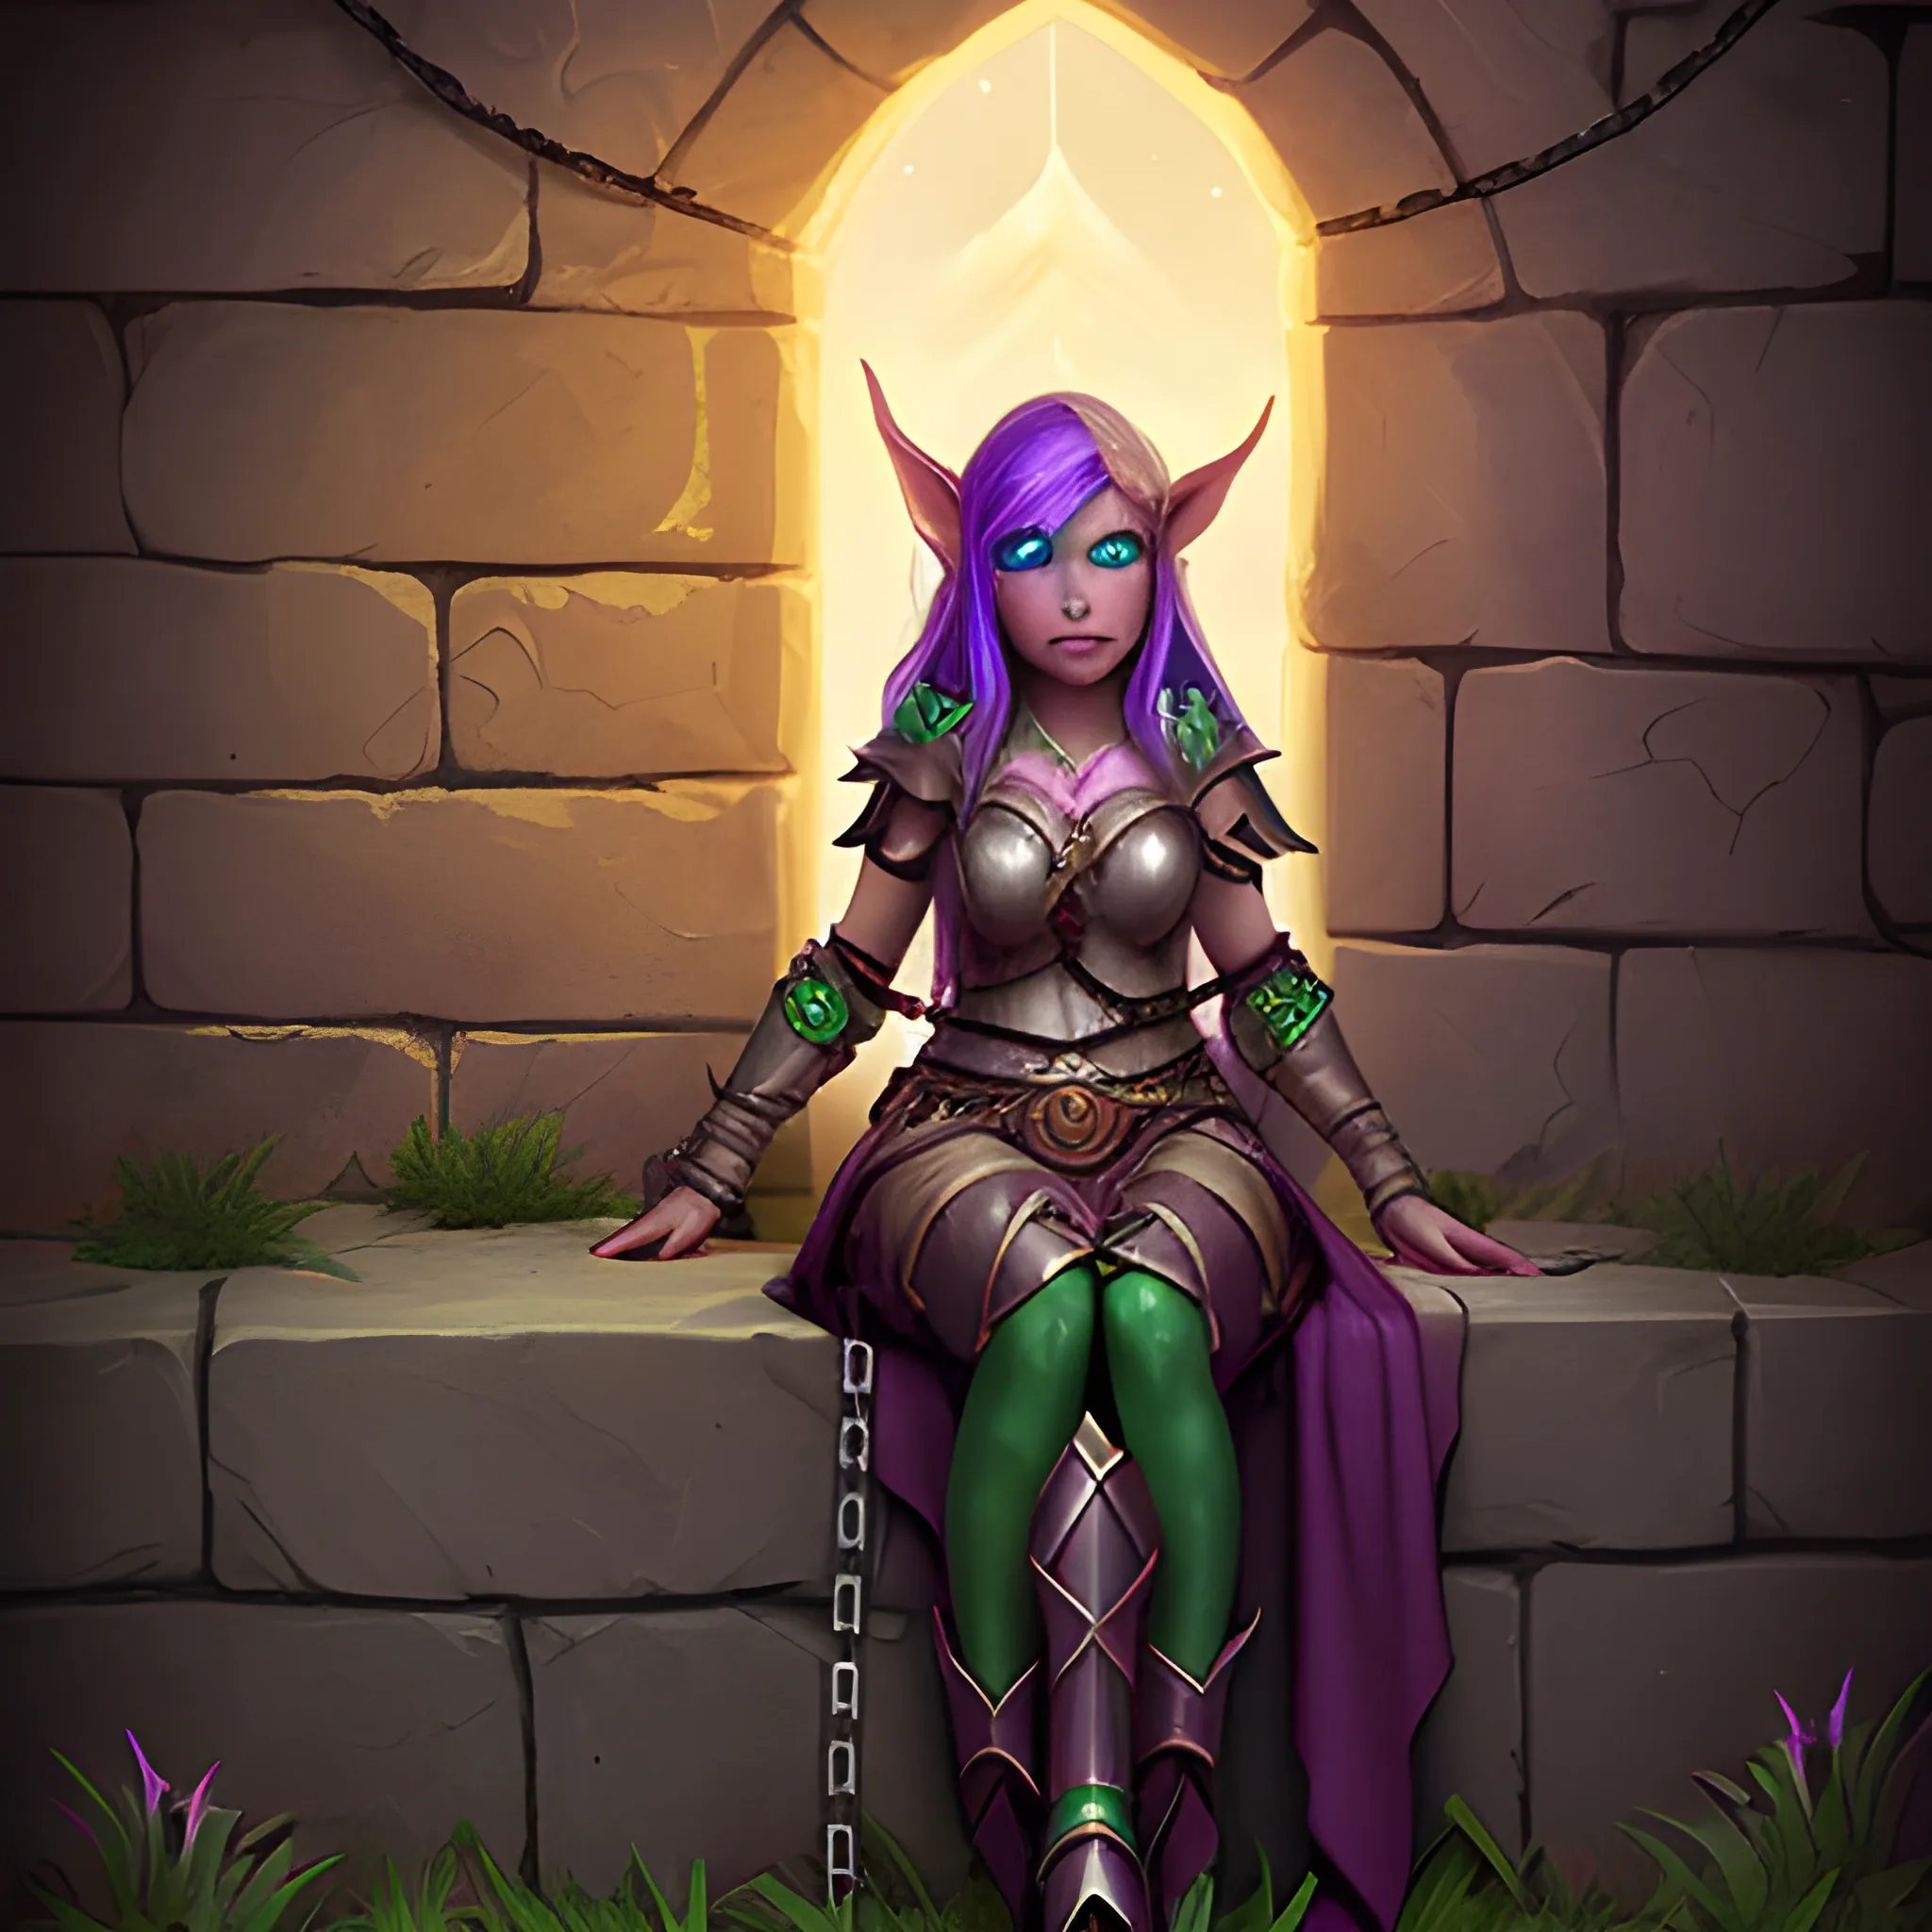 Lonely Night Elf Woman chained to a wall